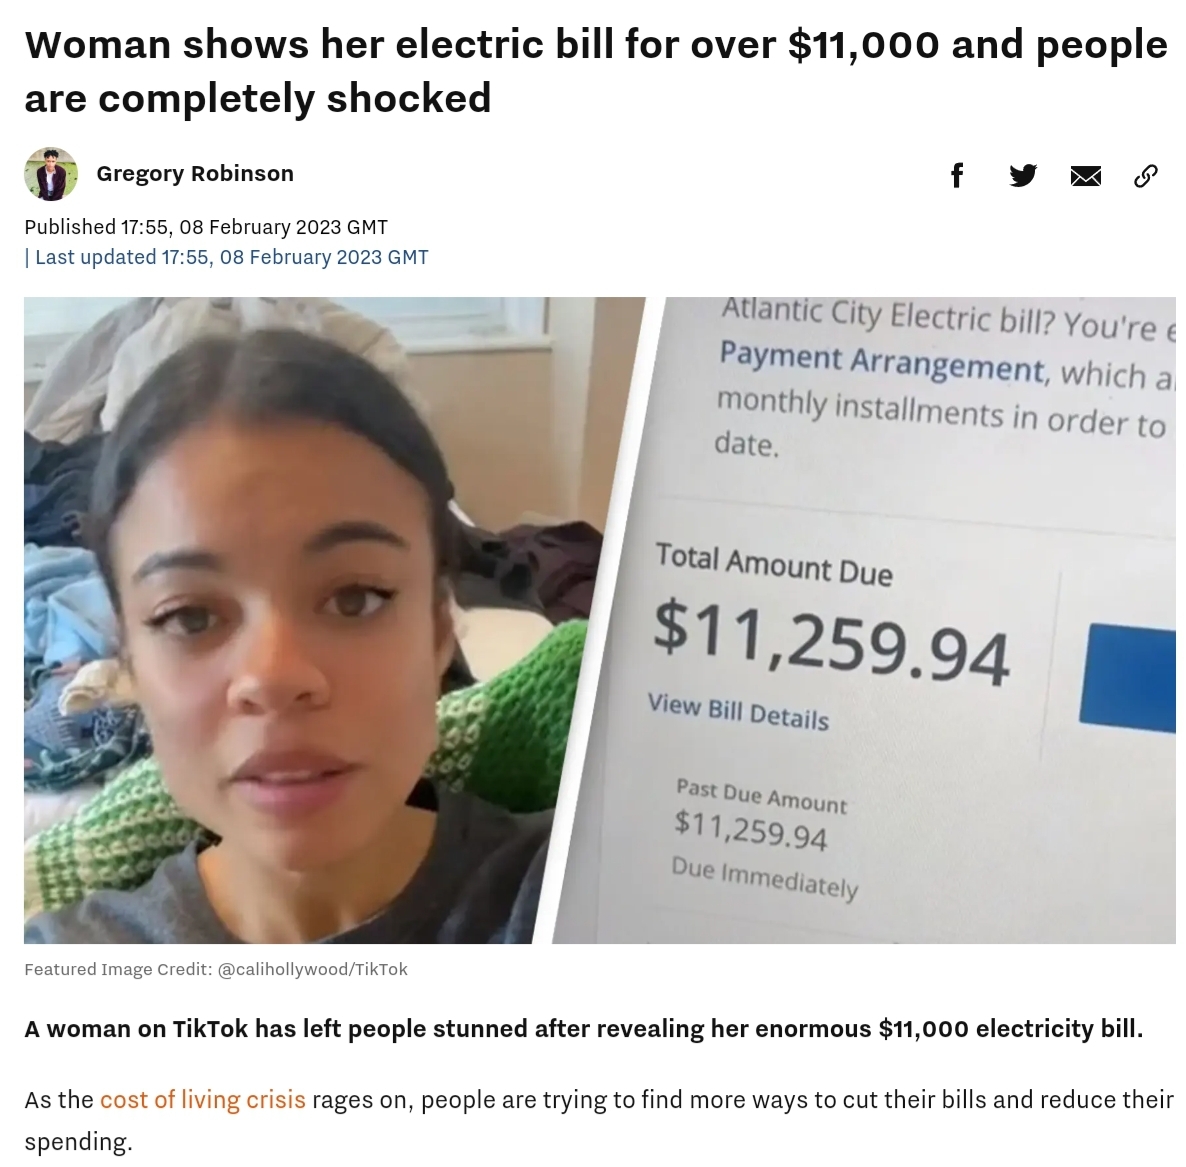 Lady exhibits her electrical invoice for over $11,000 and folks are fully apprehensive